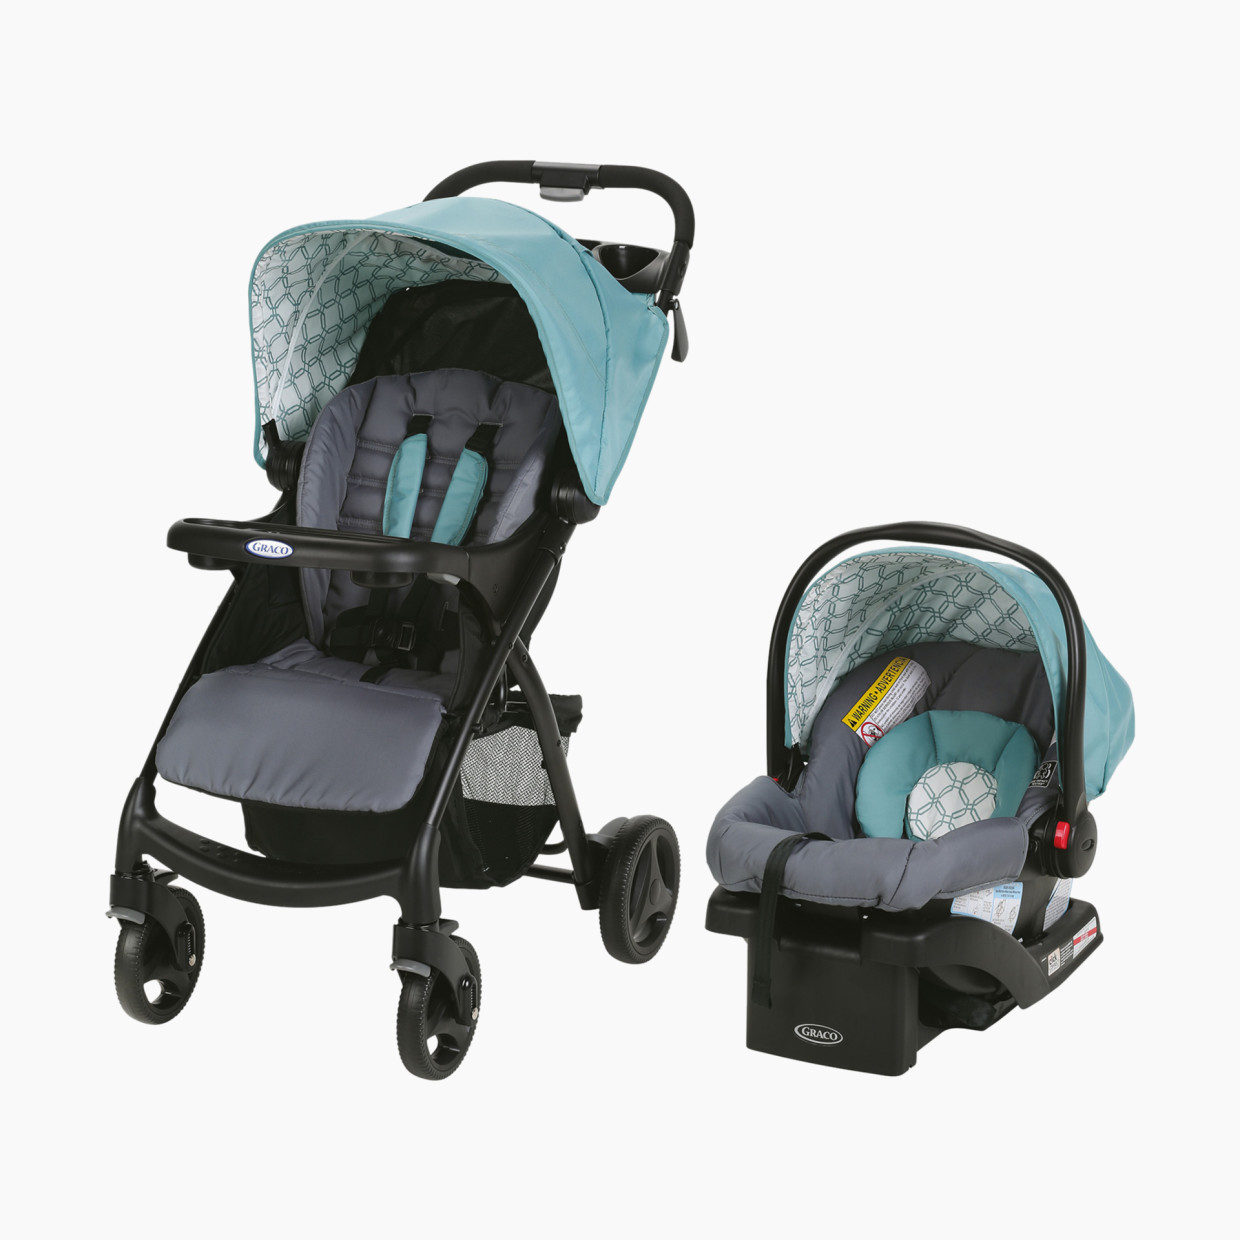 Graco Verb Click Connect Travel System - Merrick.